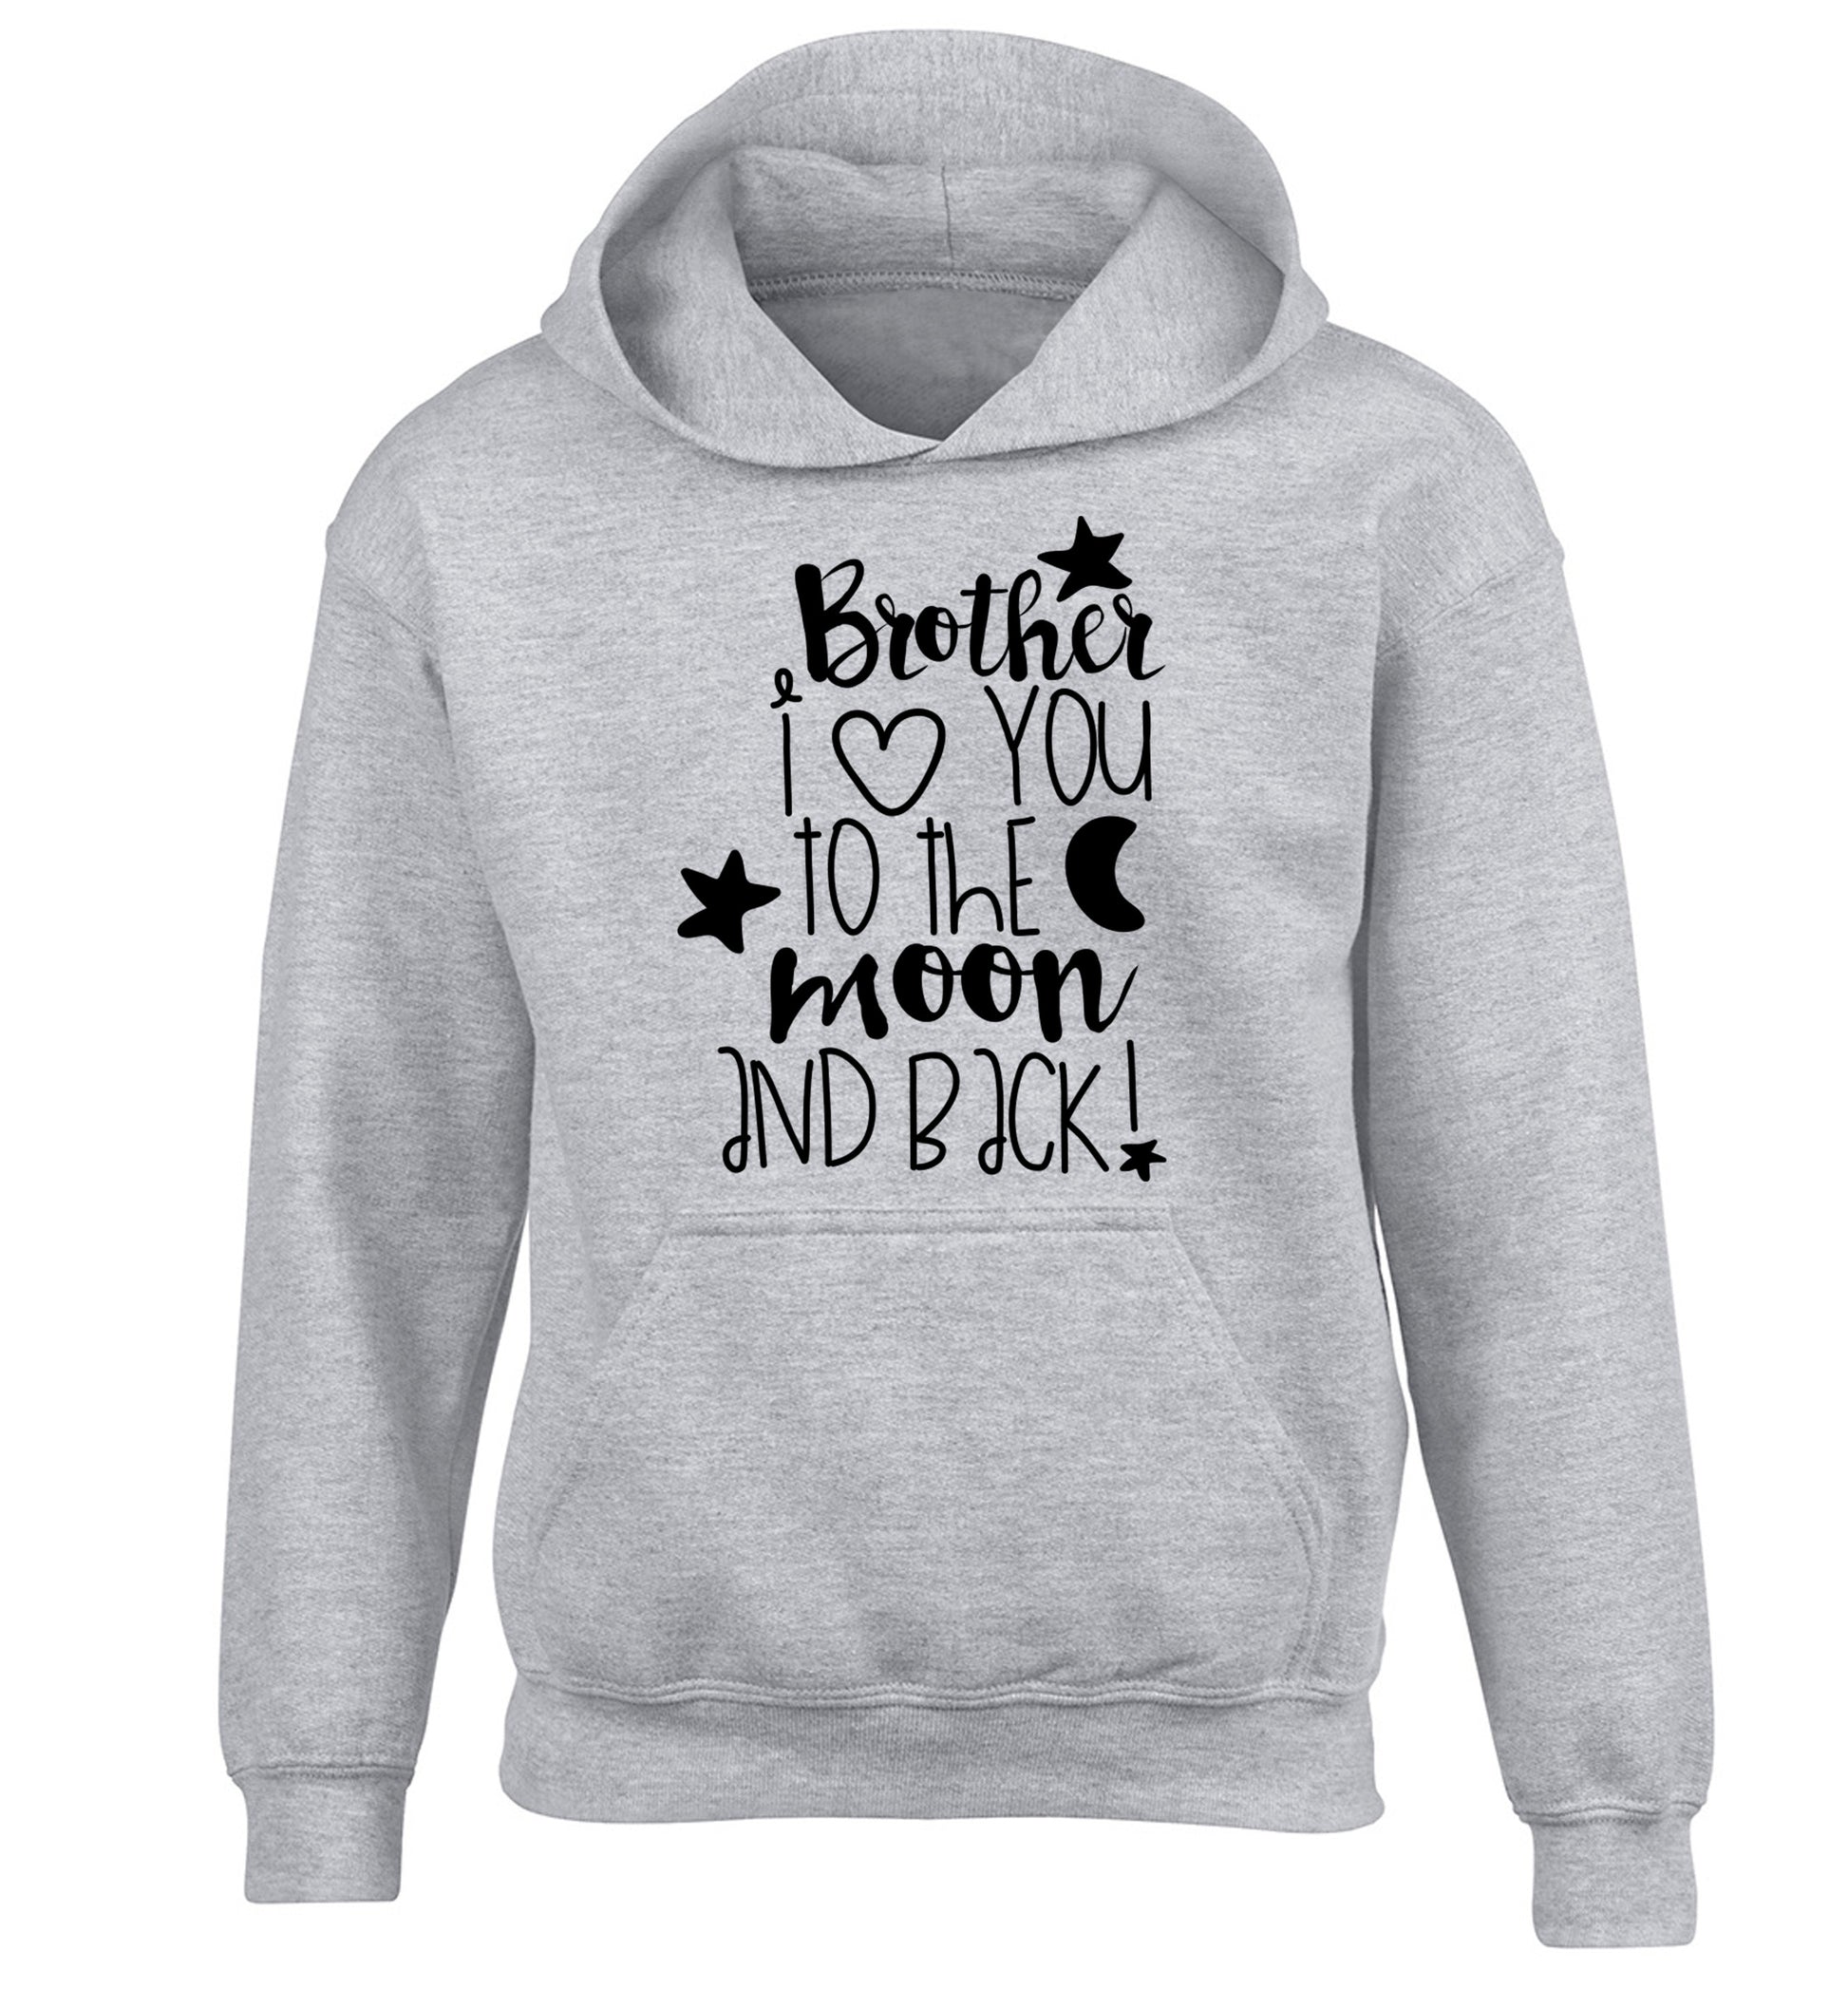 Brother I love you to the moon and back children's grey hoodie 12-14 Years